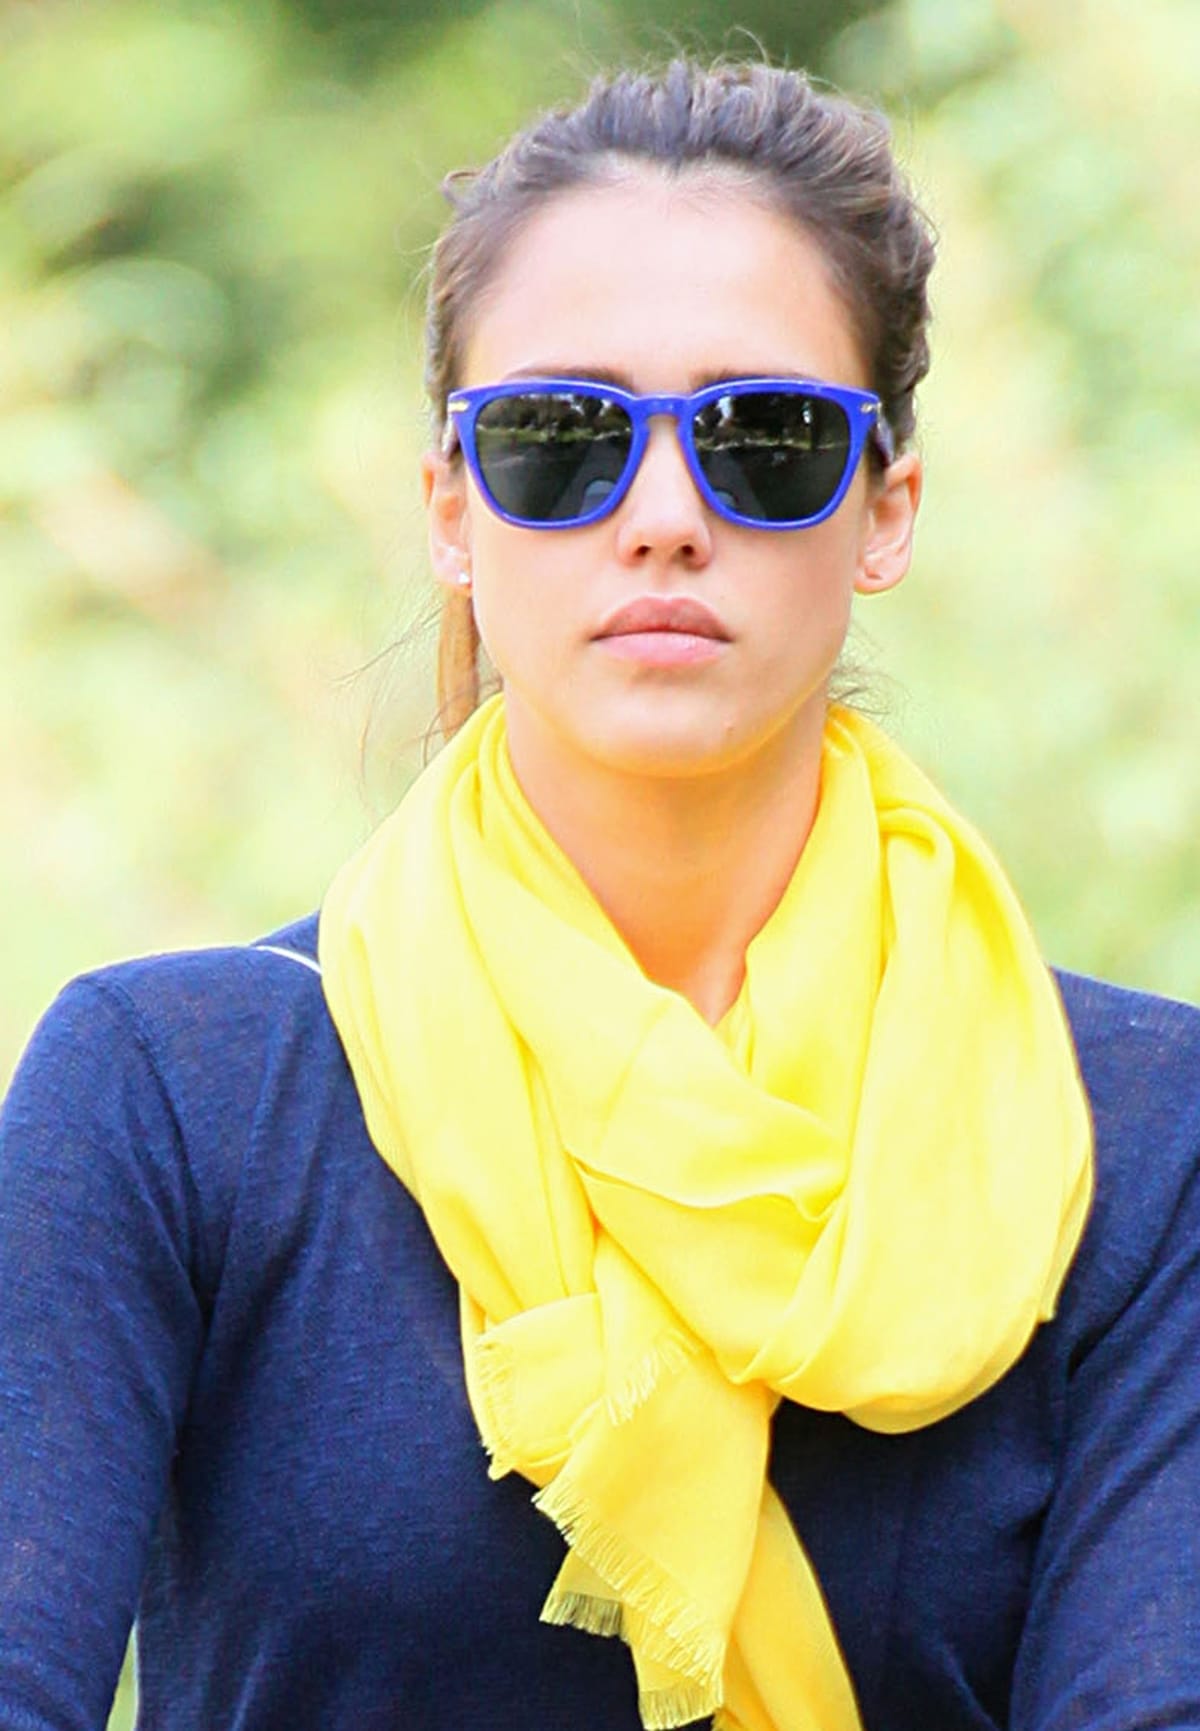 Jessica Alba wraps up her Beverly Hills outing in vibrant style, with her bright yellow Love Quotes scarf perfectly accentuating her navy color block ensemble